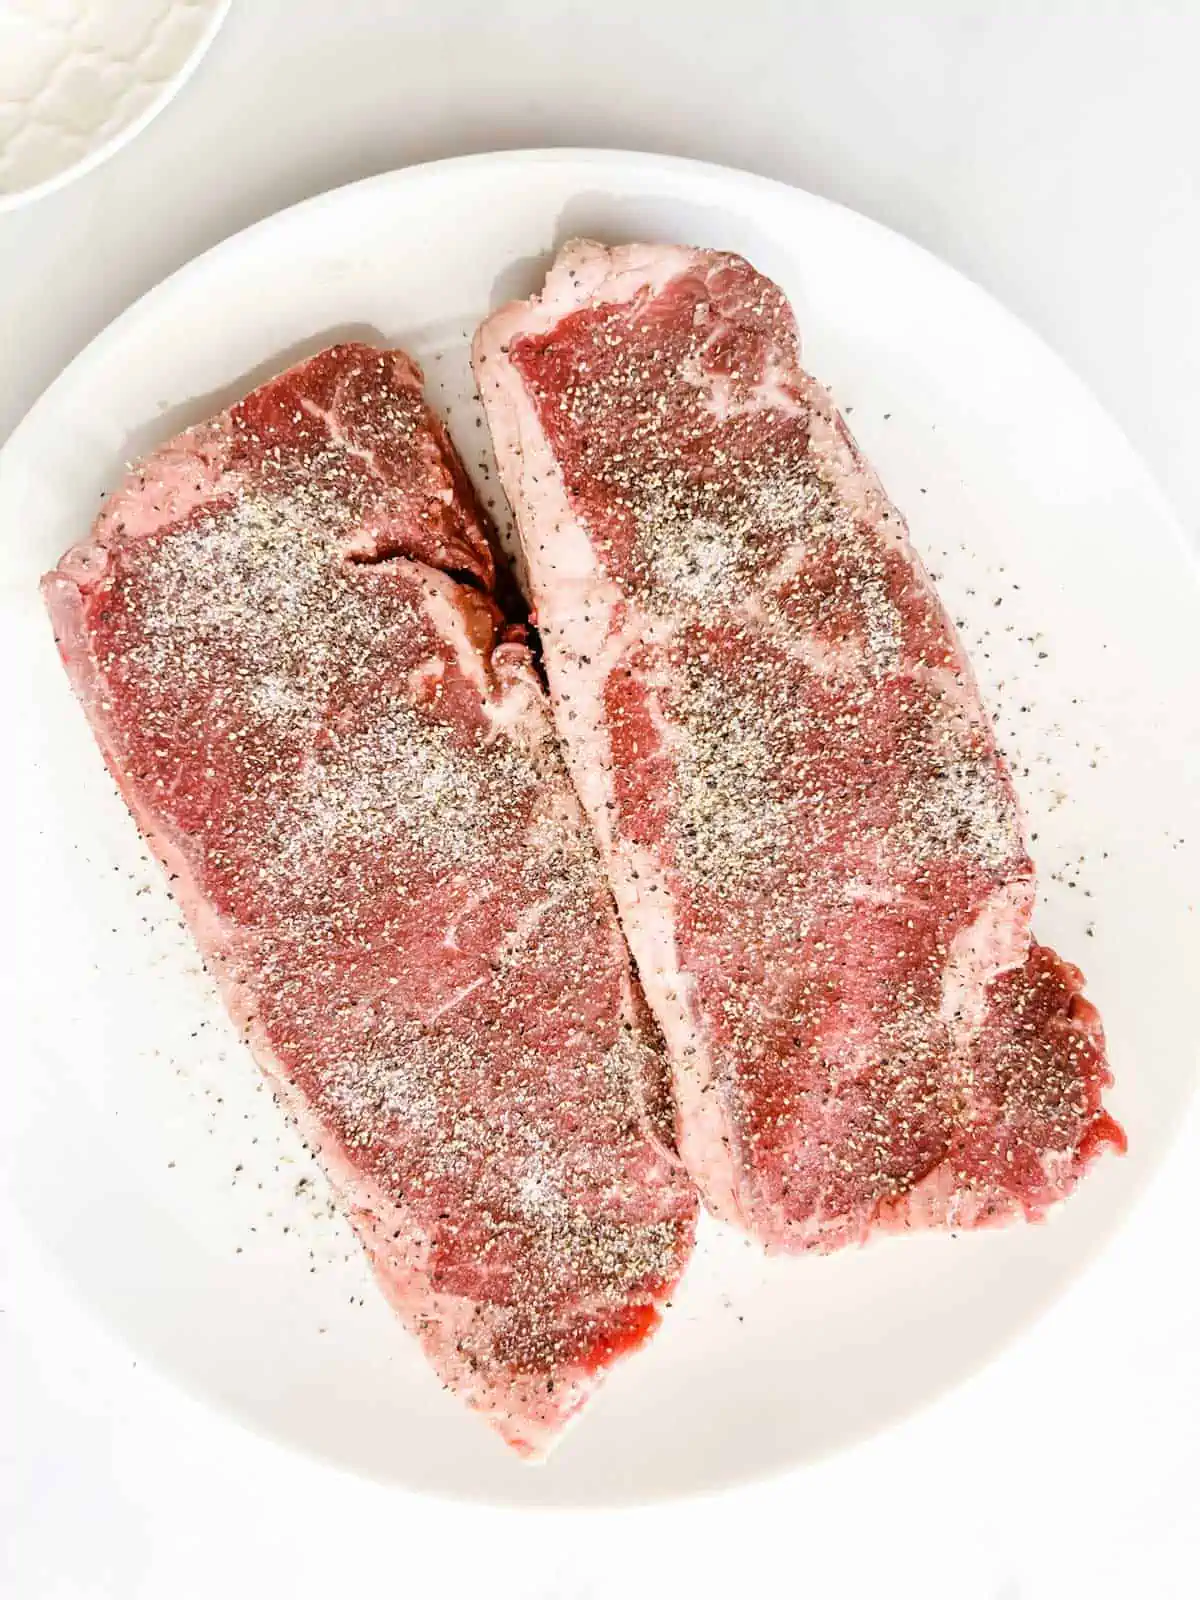 Steaks that have been seasoned sitting on a white plate.